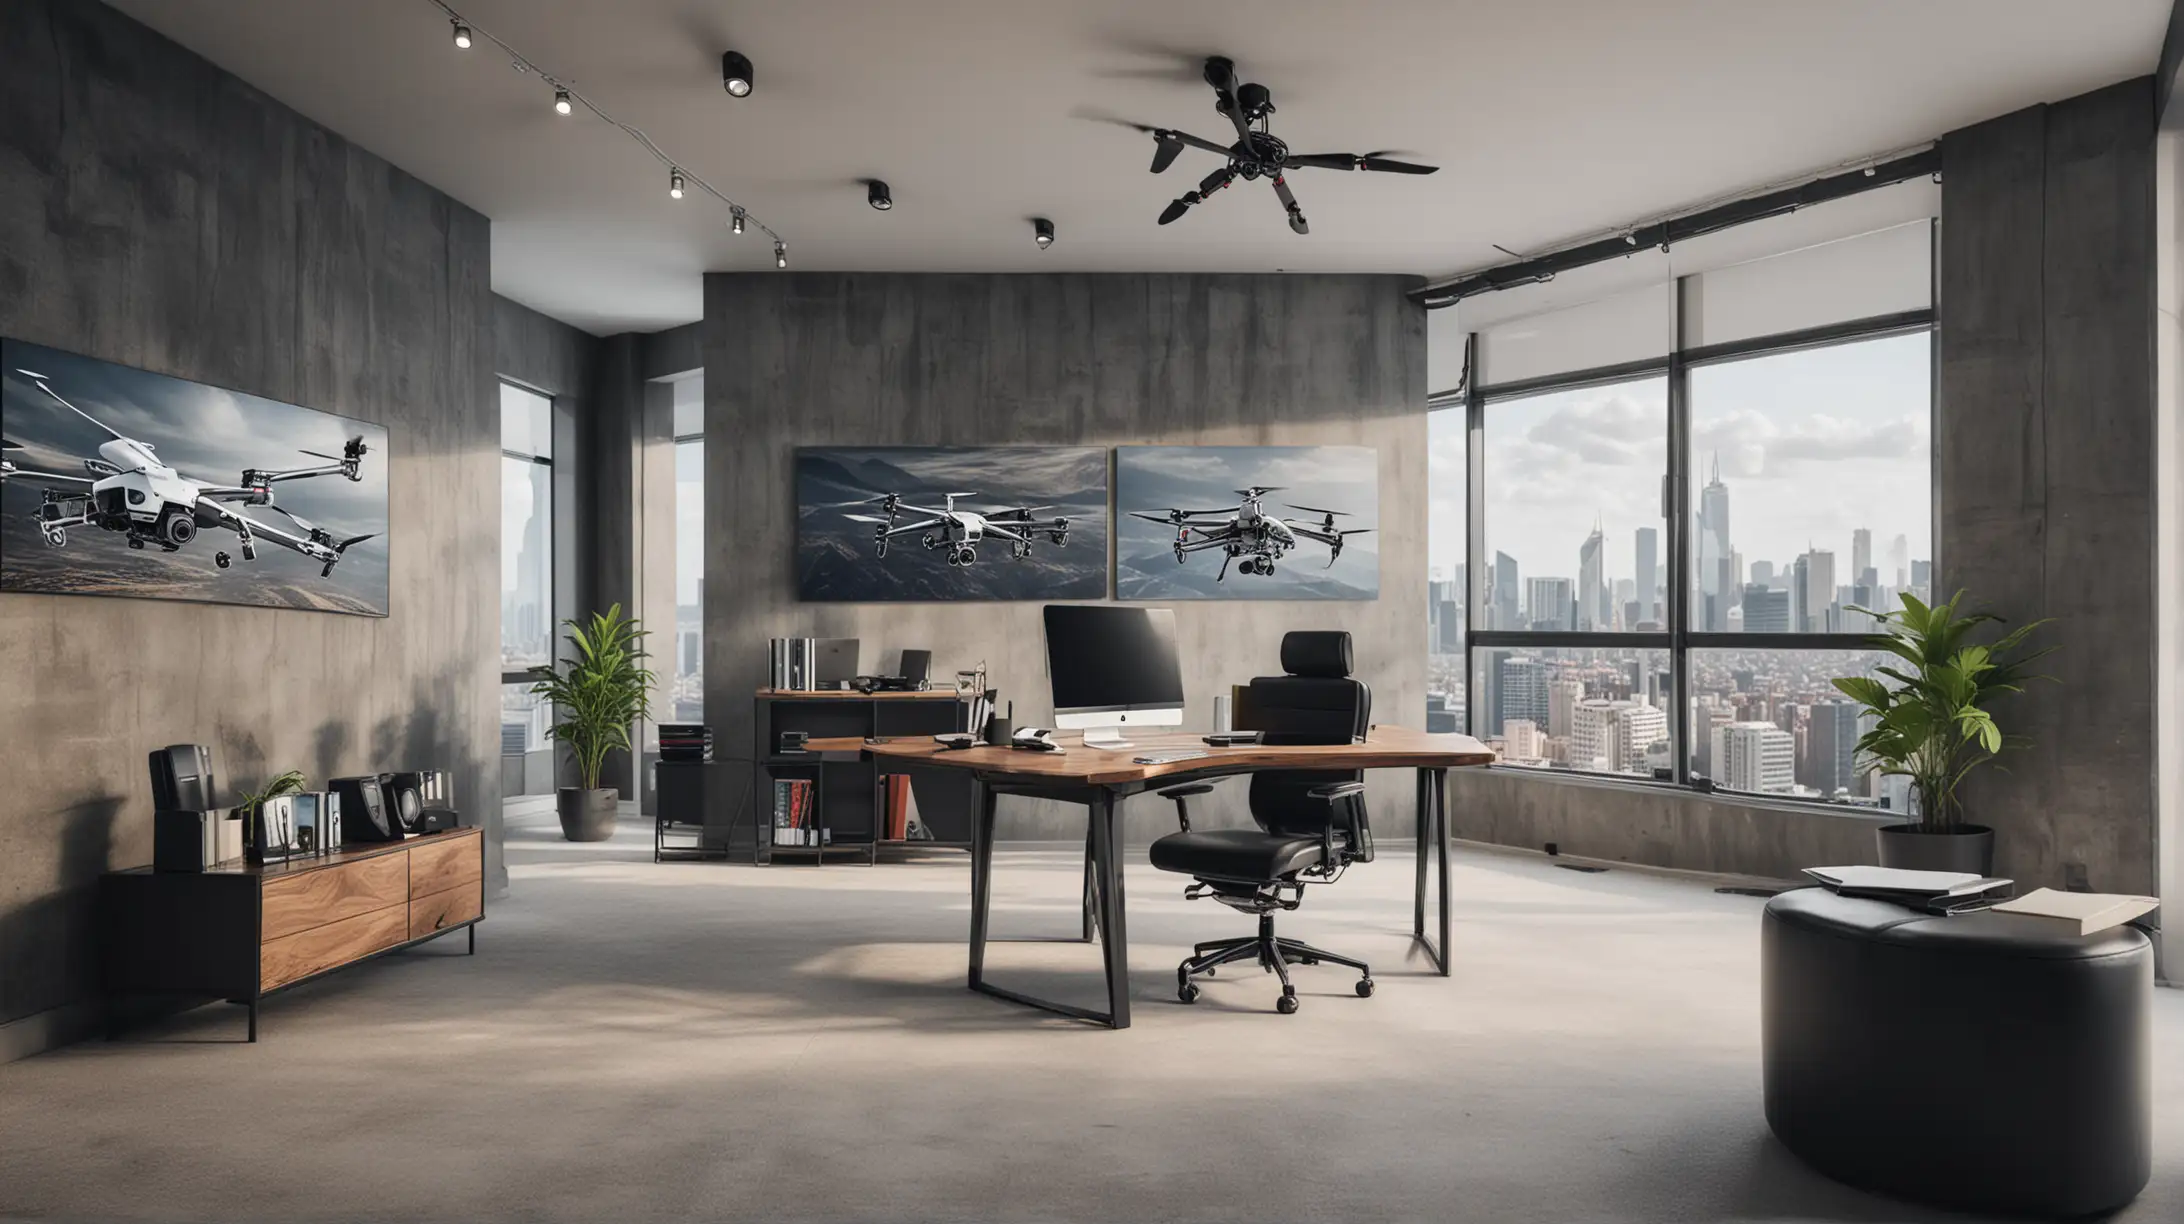 generate a office background
 for the ceo of a drone flying company that does photograph, video and drone mapping and training